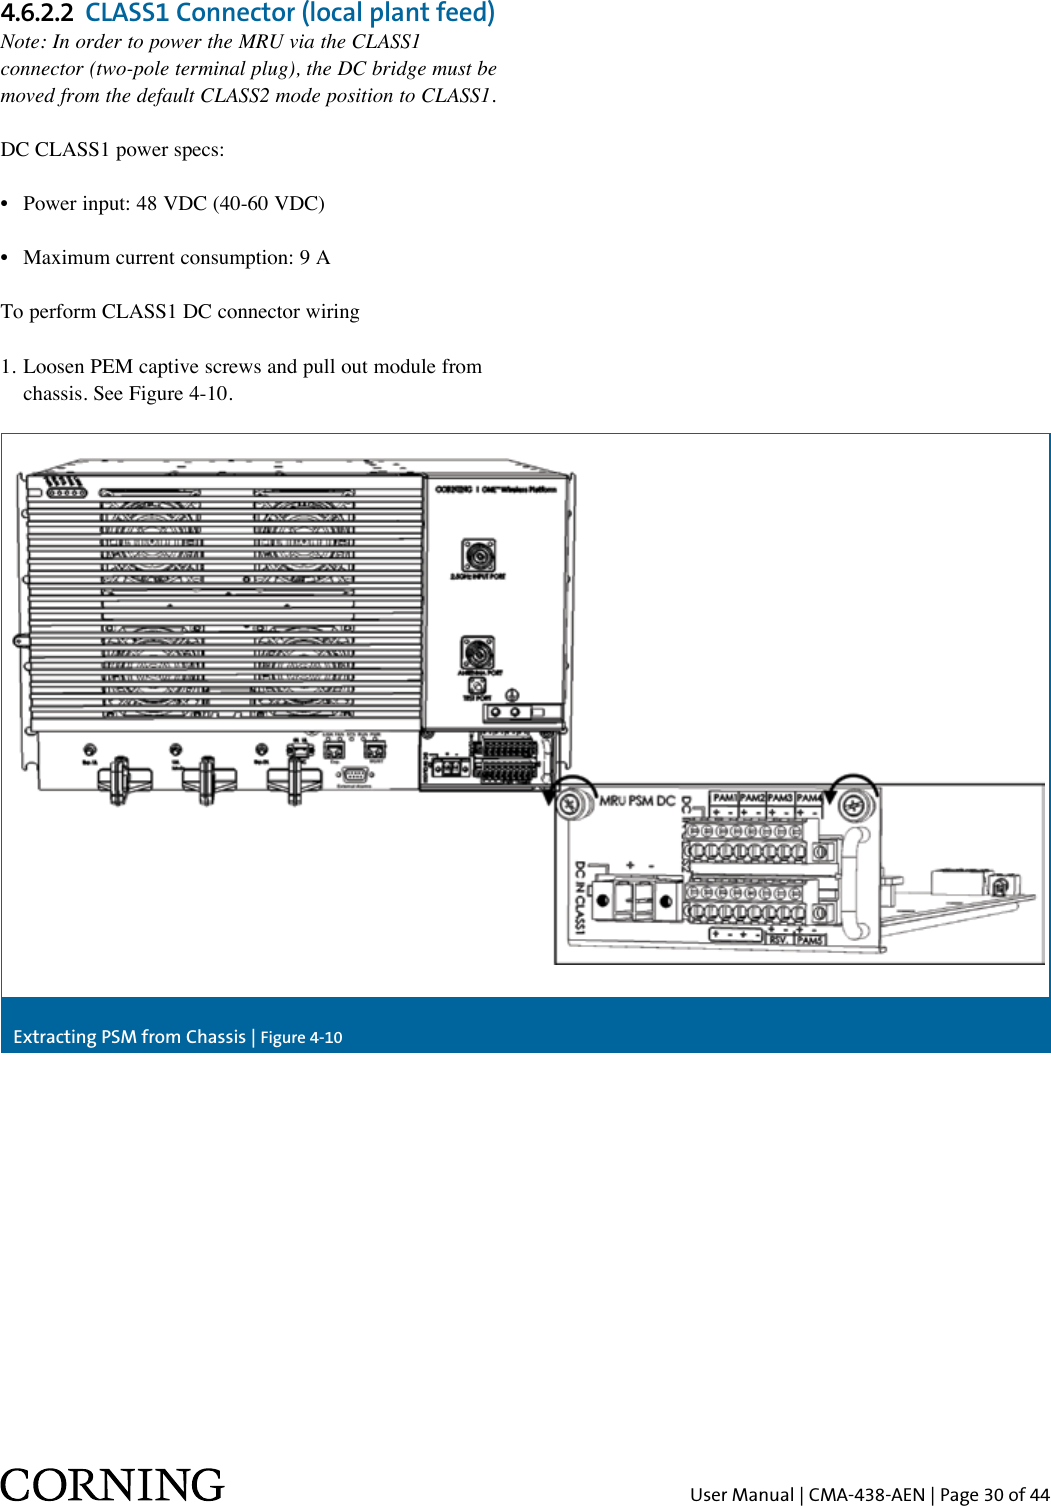 User Manual | CMA-438-AEN | Page 30 of 444.6.2.2  CLASS1 Connector (local plant feed)Note: In order to power the MRU via the CLASS1 connector (two-pole terminal plug), the DC bridge must be moved from the default CLASS2 mode position to CLASS1.DC CLASS1 power specs: •  Power input: 48 VDC (40-60 VDC)•  Maximum current consumption: 9 A To perform CLASS1 DC connector wiring1. Loosen PEM captive screws and pull out module from    chassis. See Figure 4-10.Extracting PSM from Chassis | Figure 4-10